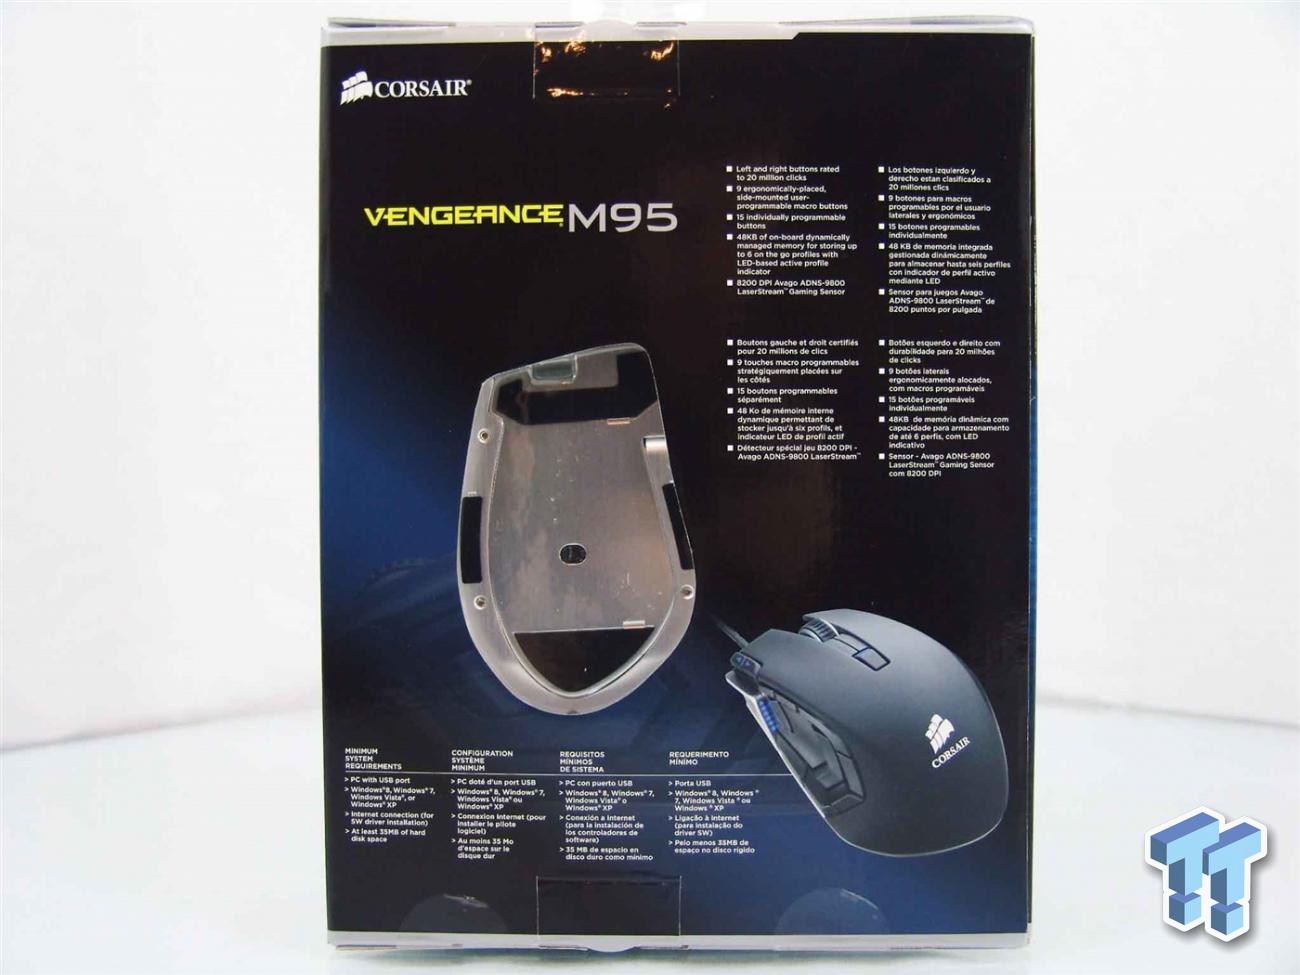 Corsair Vengeance M95 Performance MMO RTS Laser Gaming Mouse Review